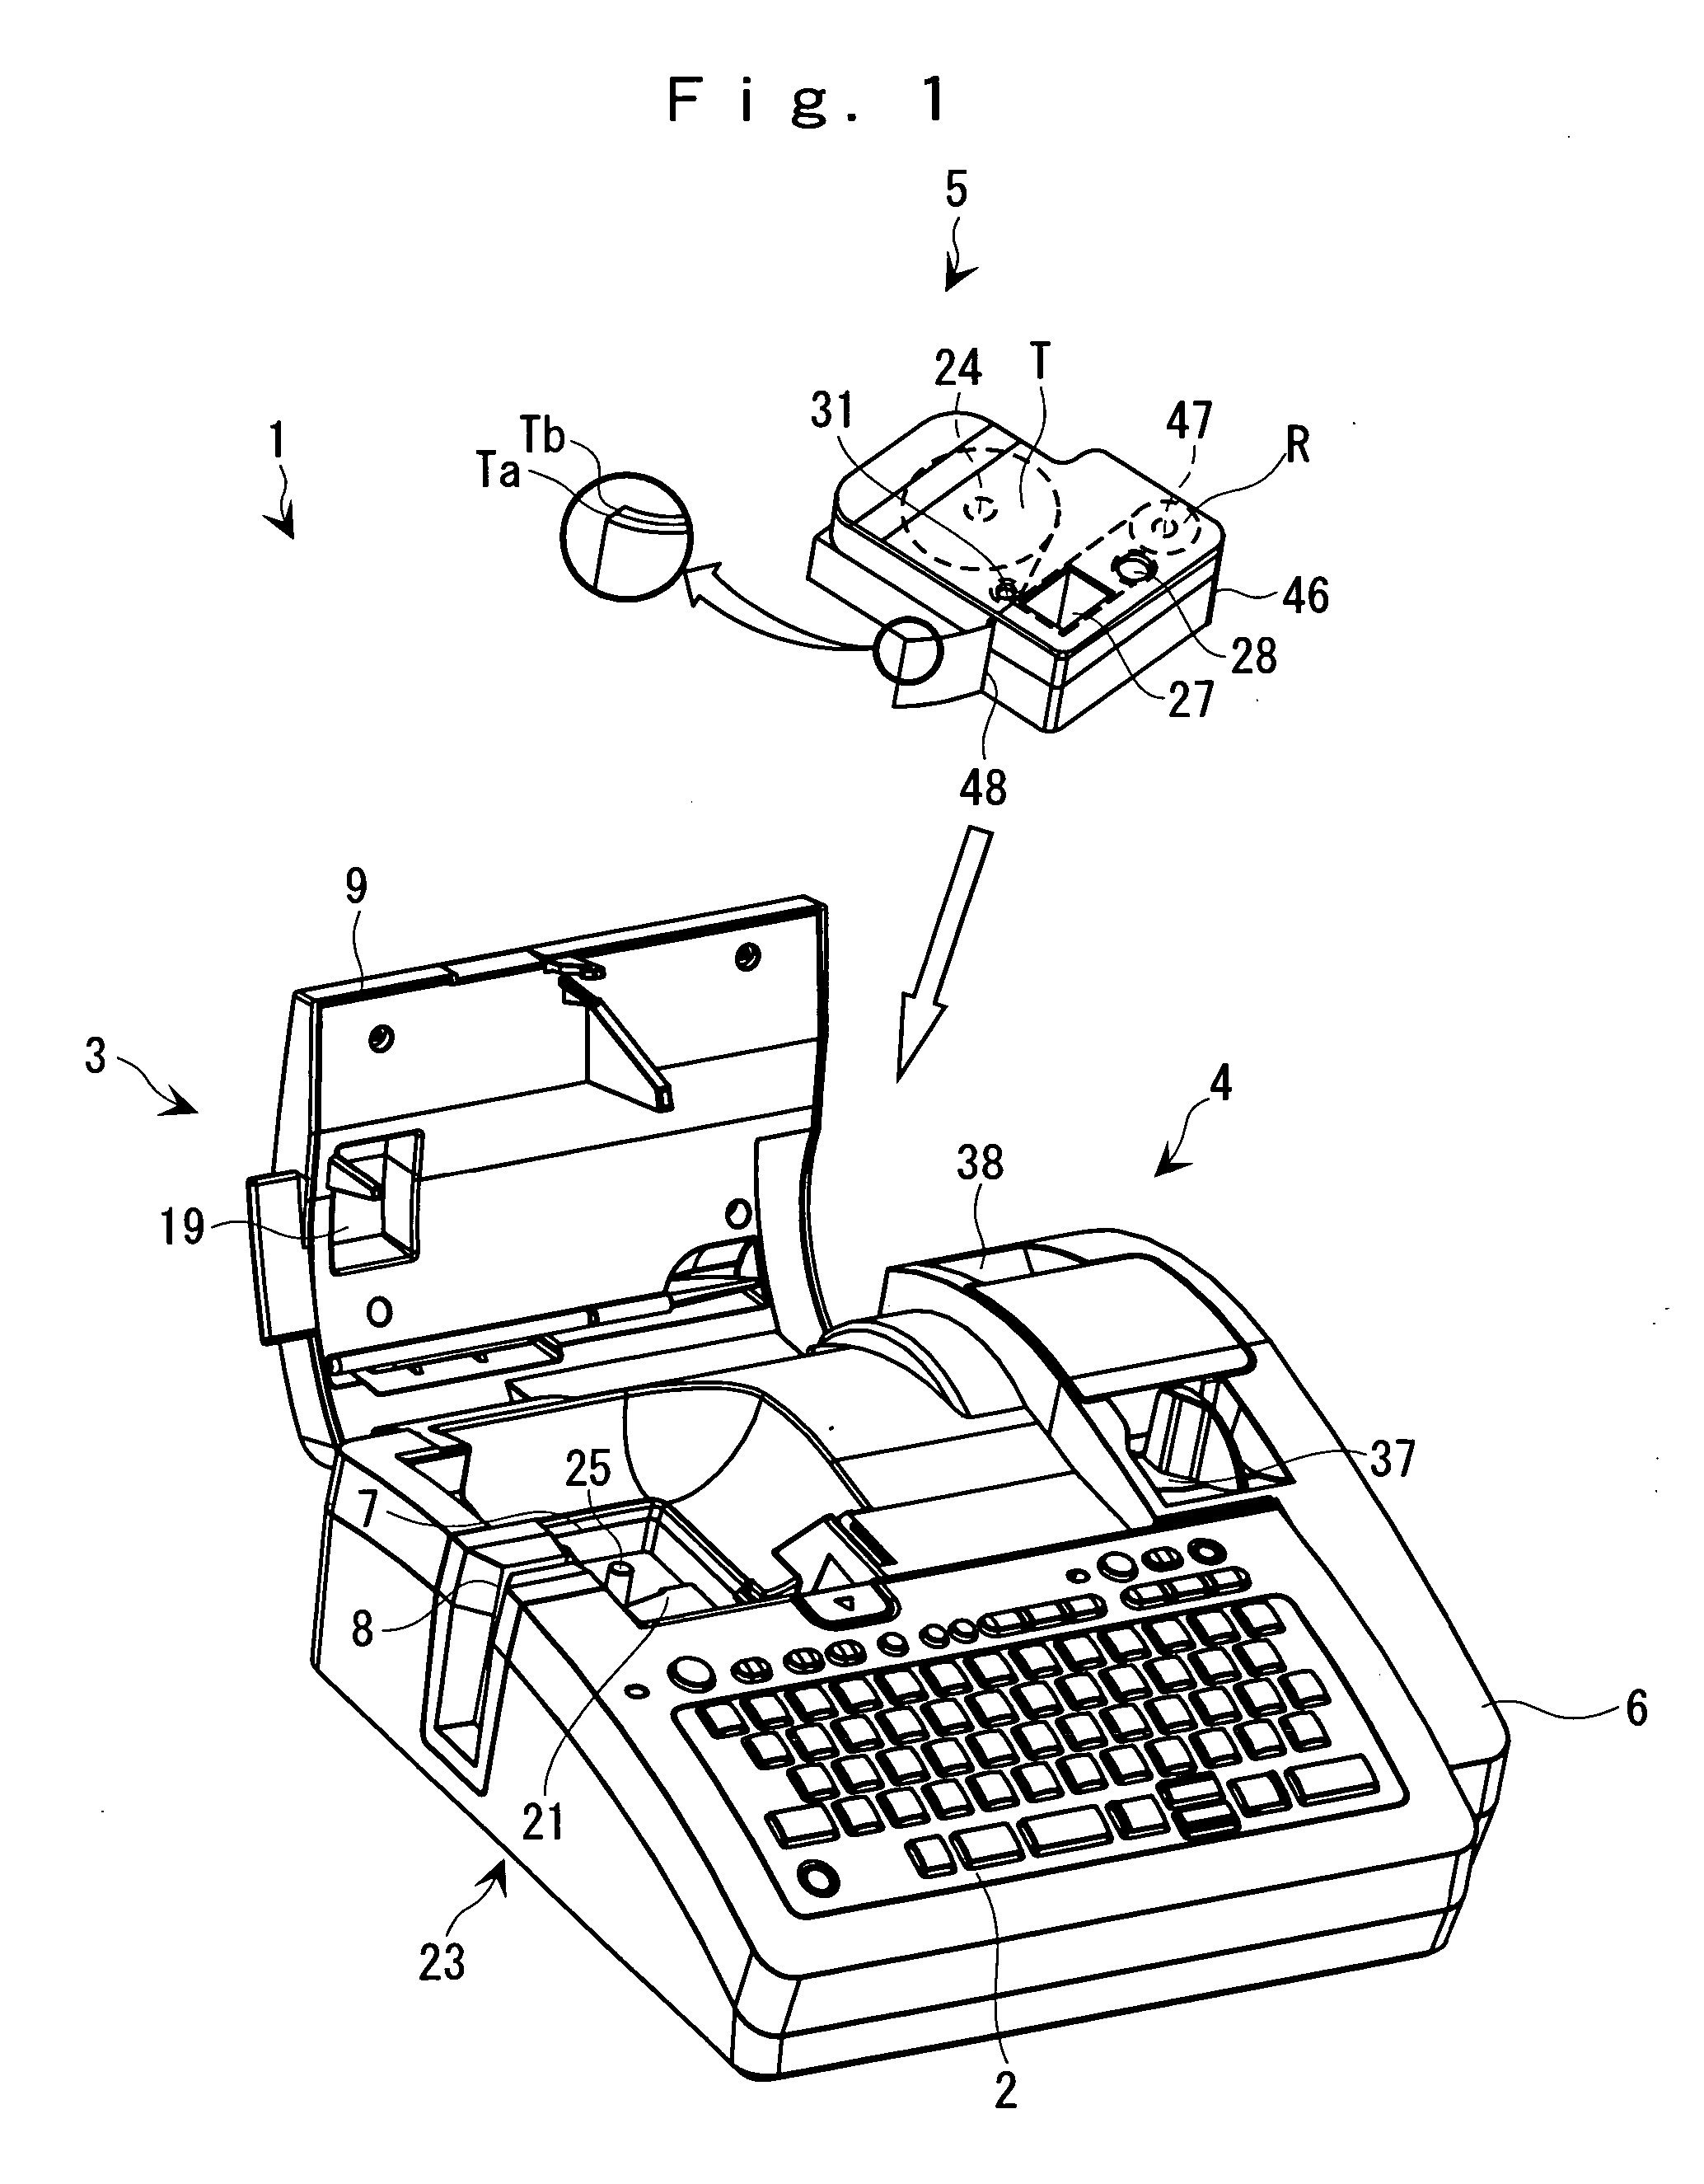 Method of, and apparatus for, processing tape